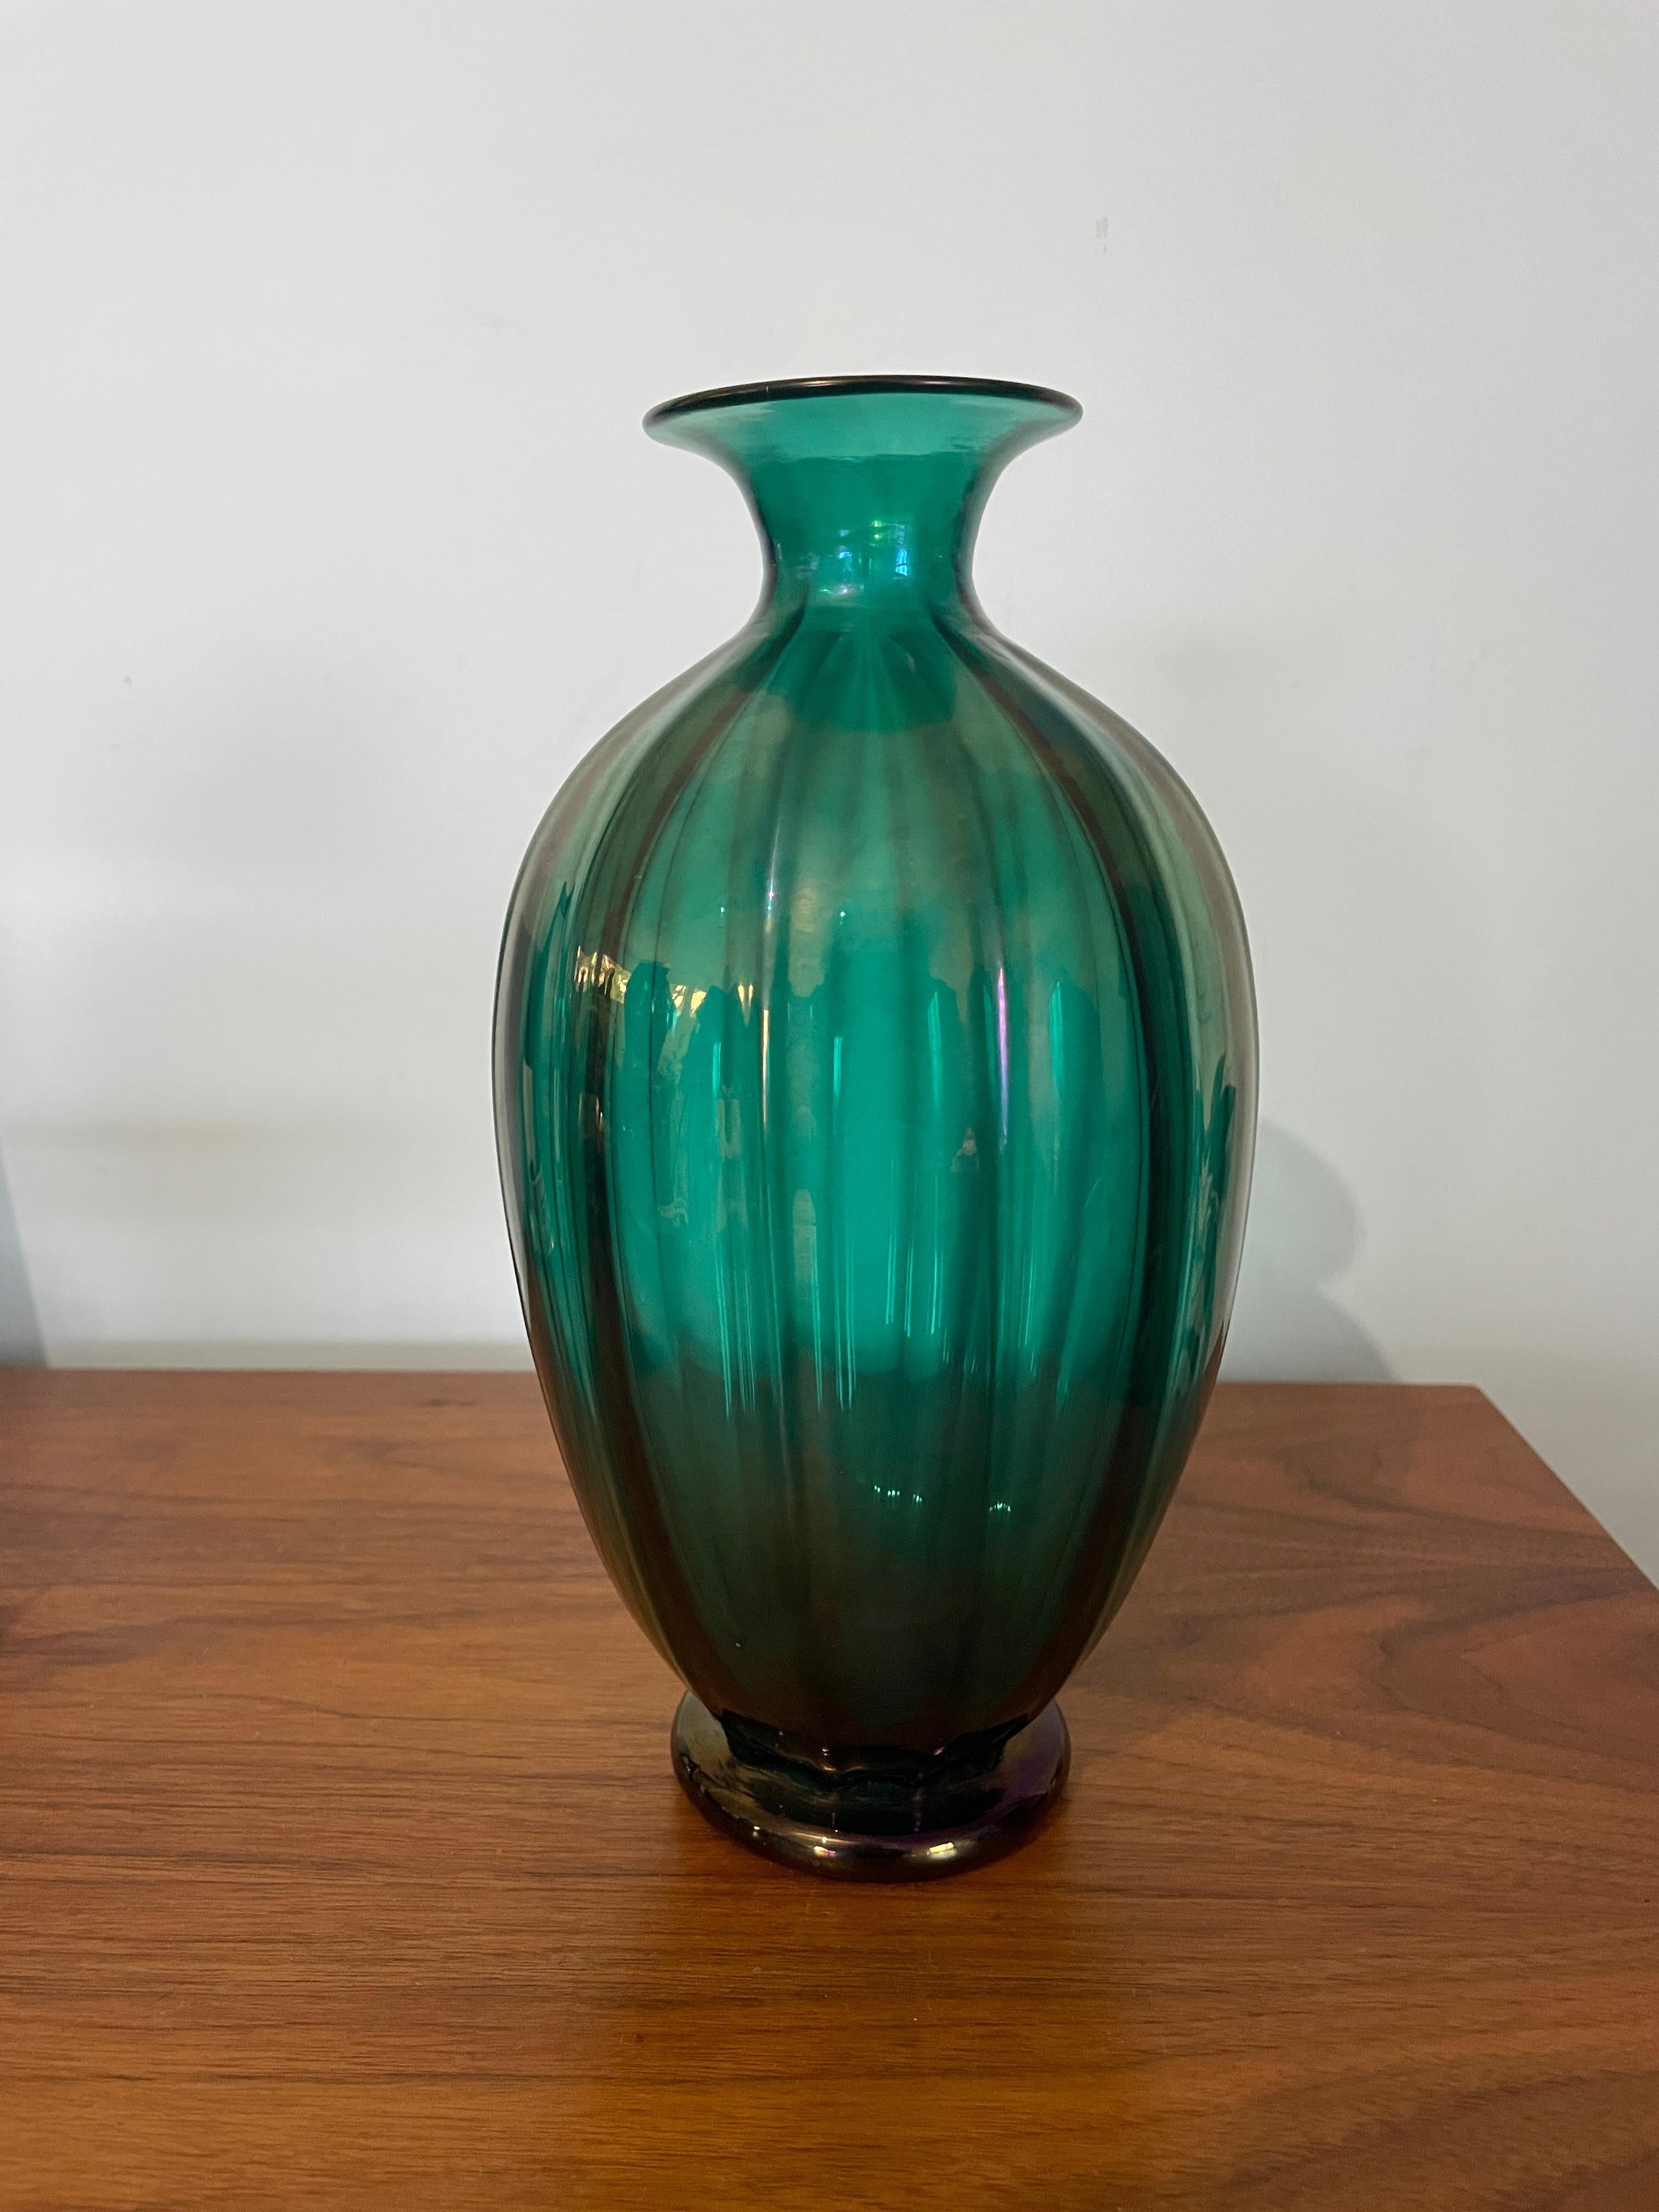 Italian Archimede Seguso Vase, Green Glass with Iridescence, Serenella Signed  For Sale